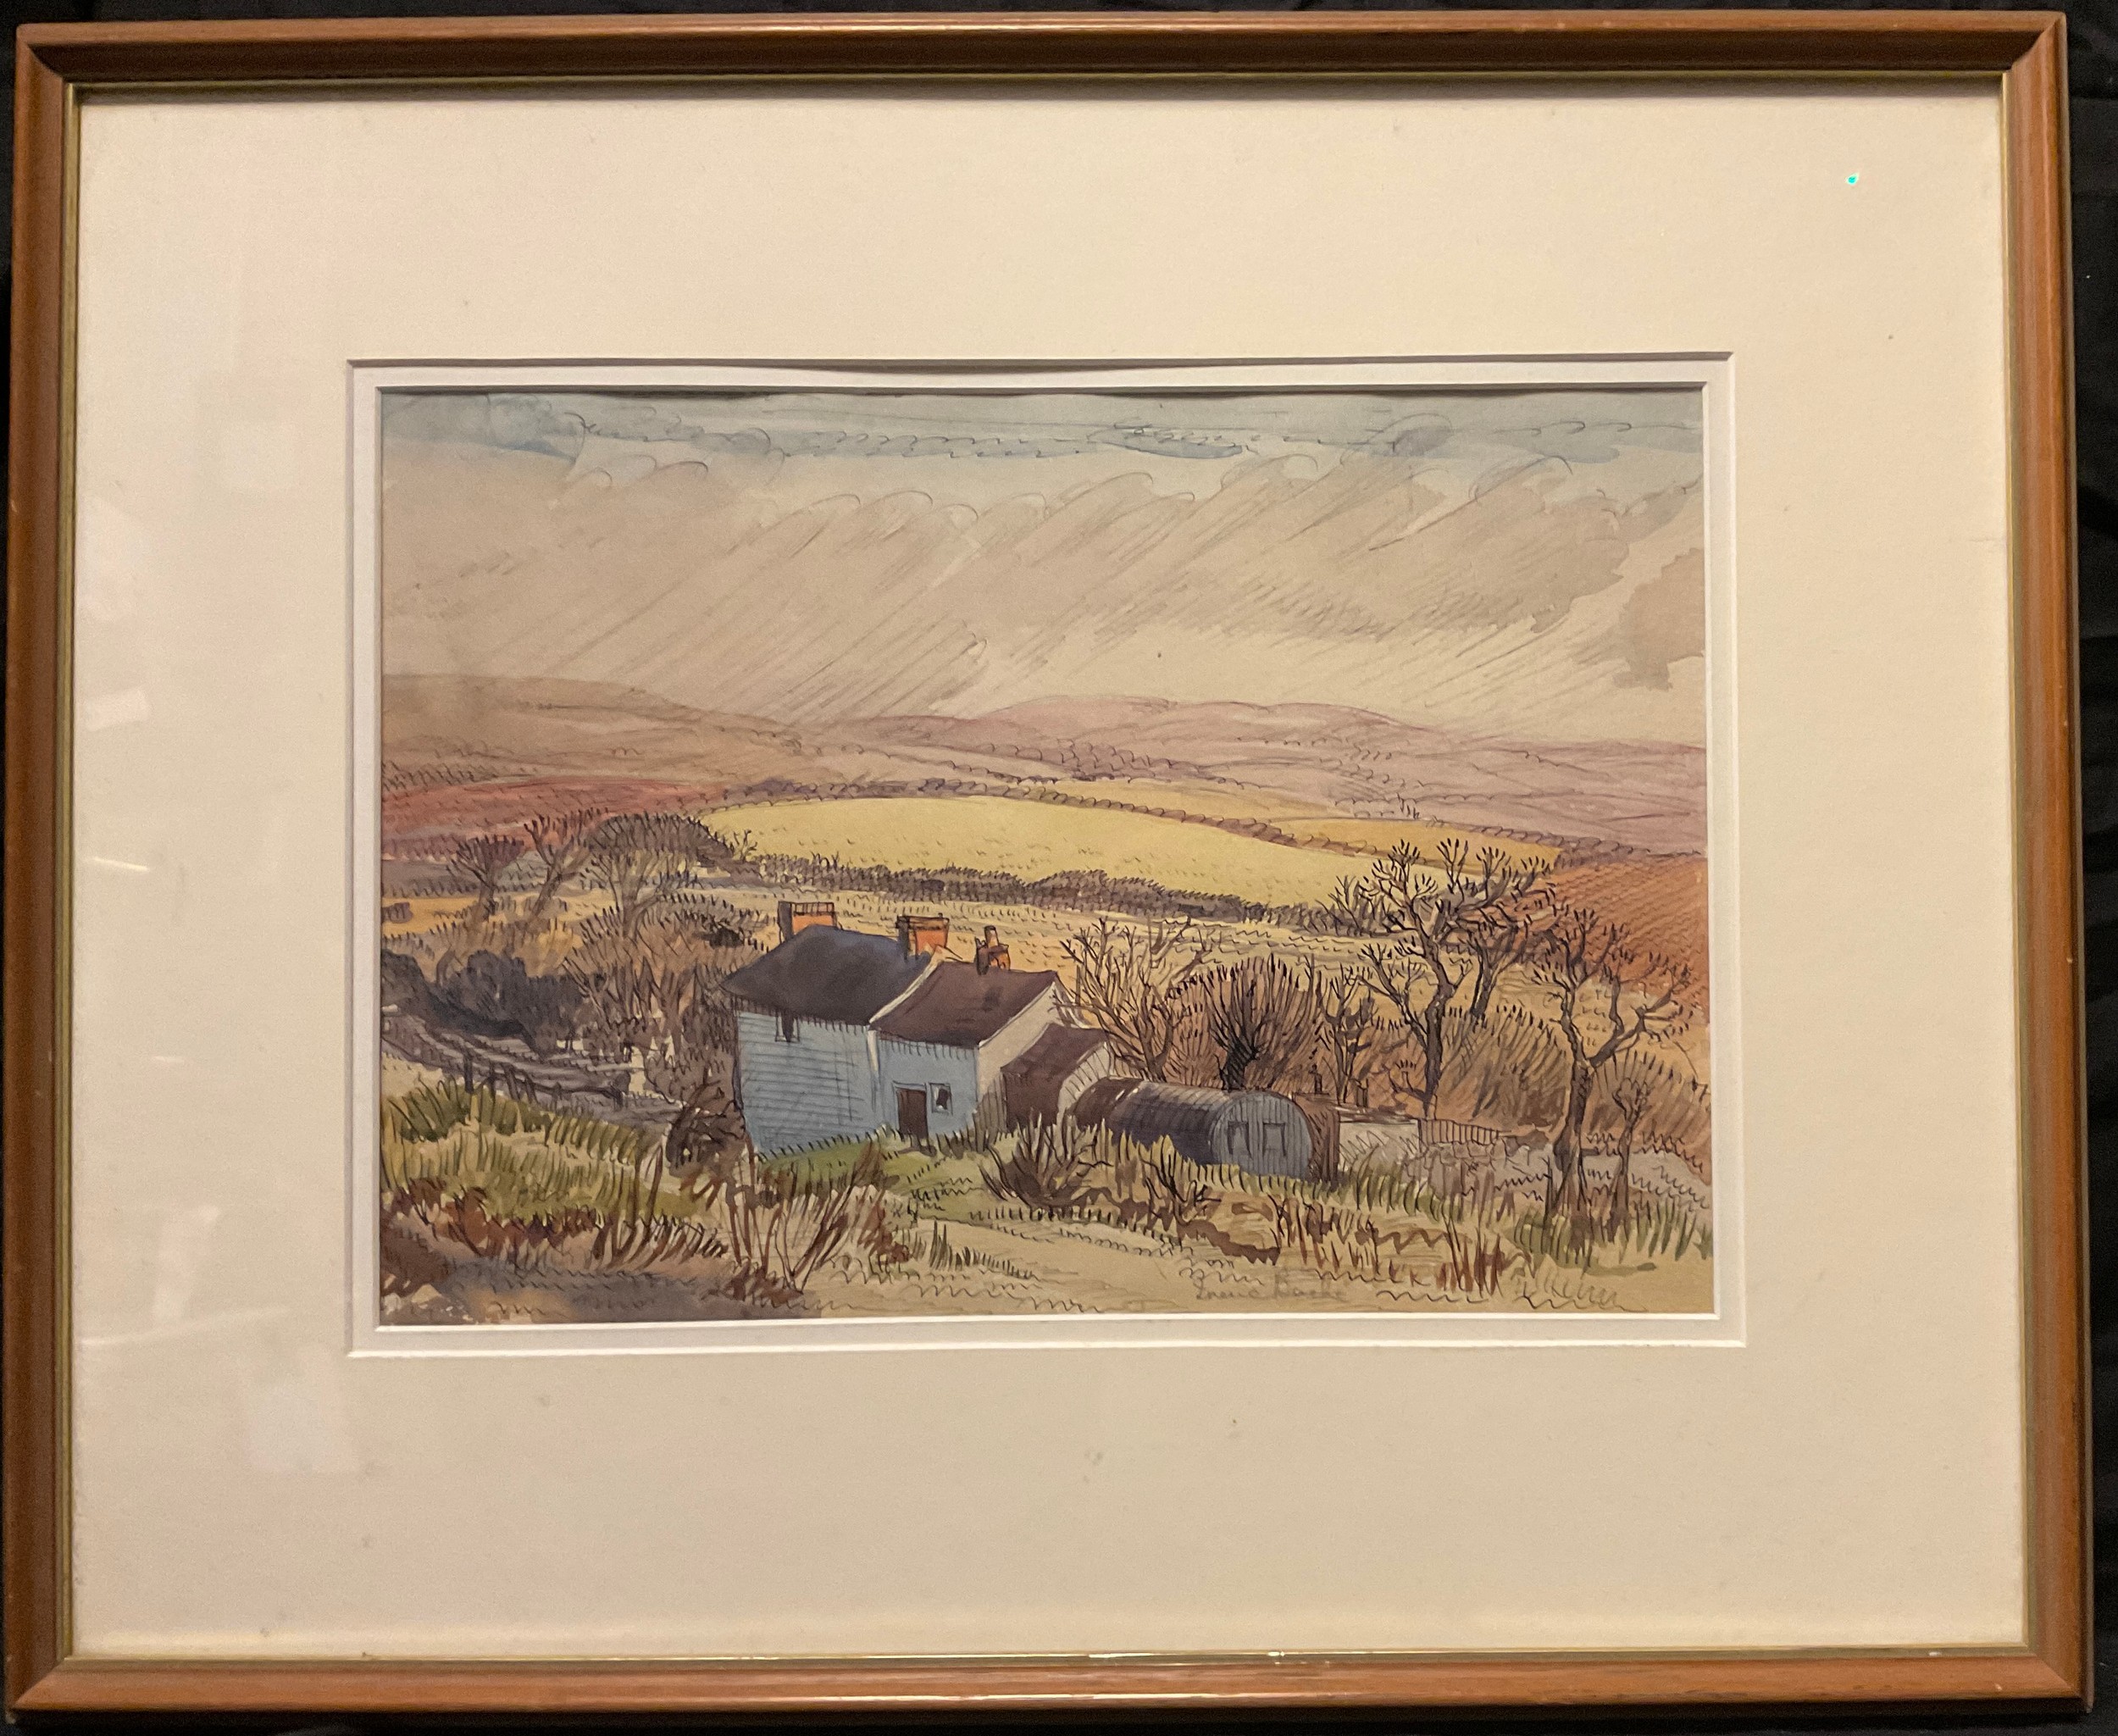 Irene Bache, (1901-1992), A View of Gower, signed, watercolour wash over pen and ink, 24cm x 34.5cm.